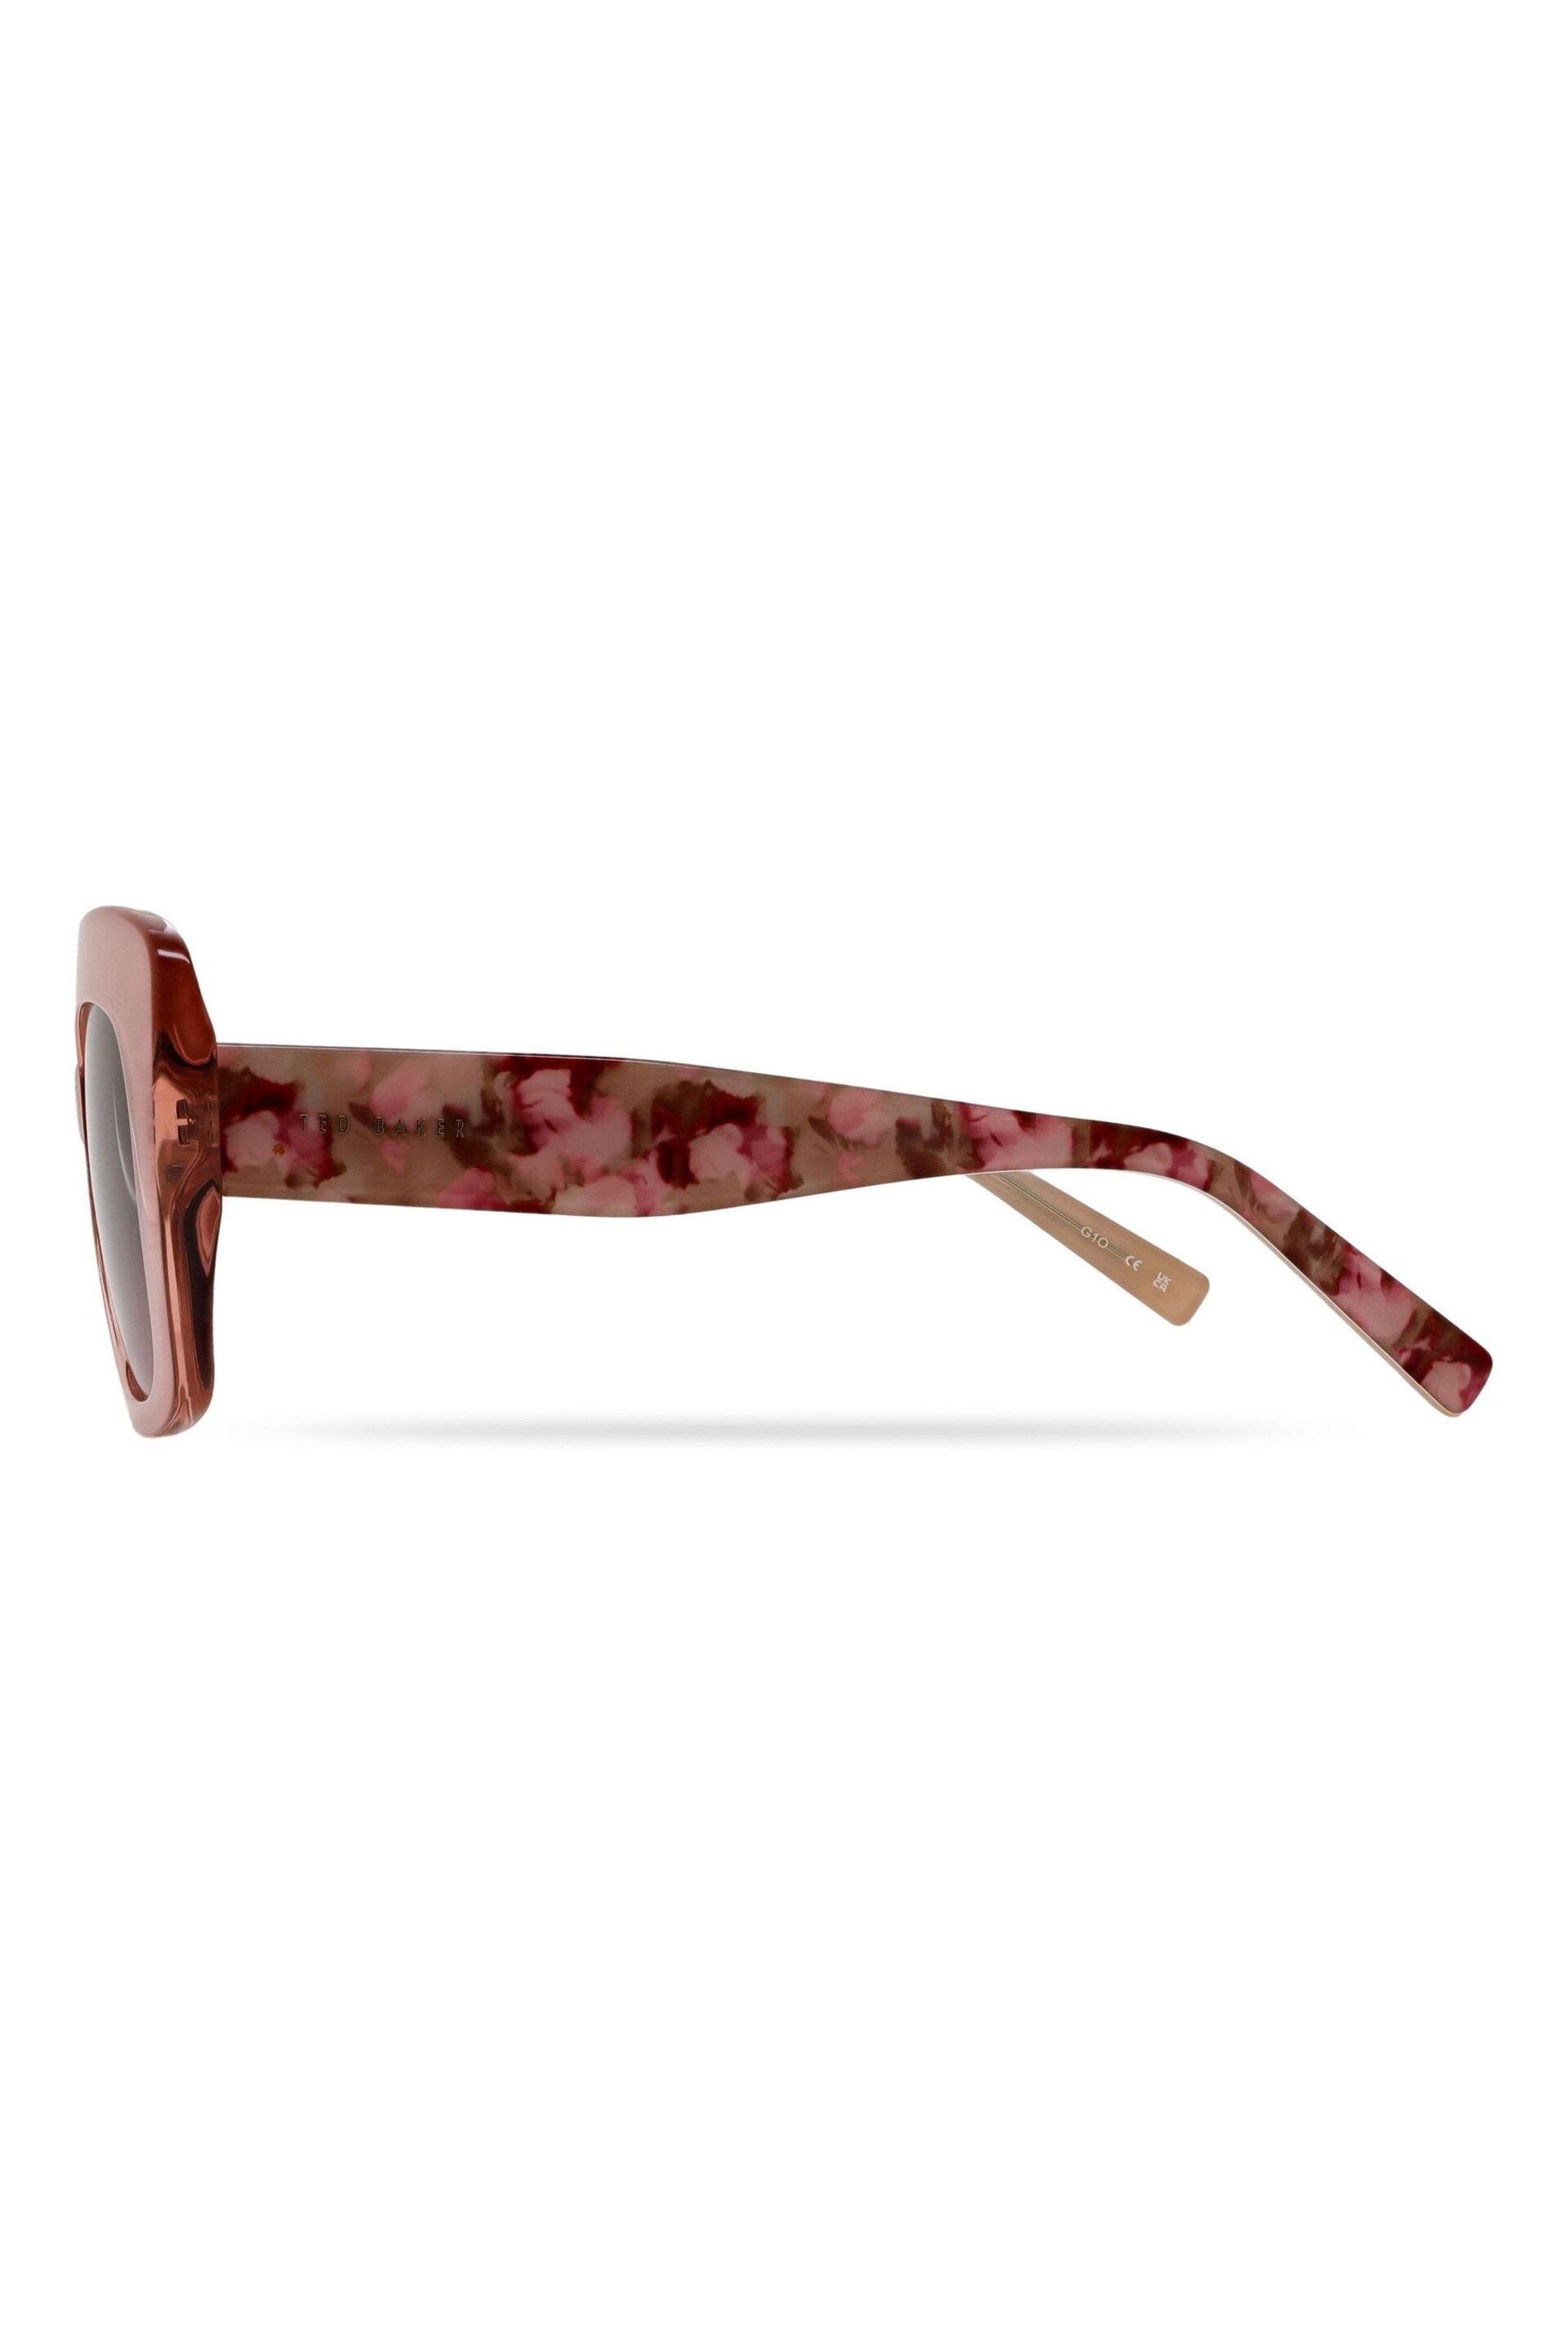 Ted Baker Pink Hattie Sunglasses - Image 3 of 5